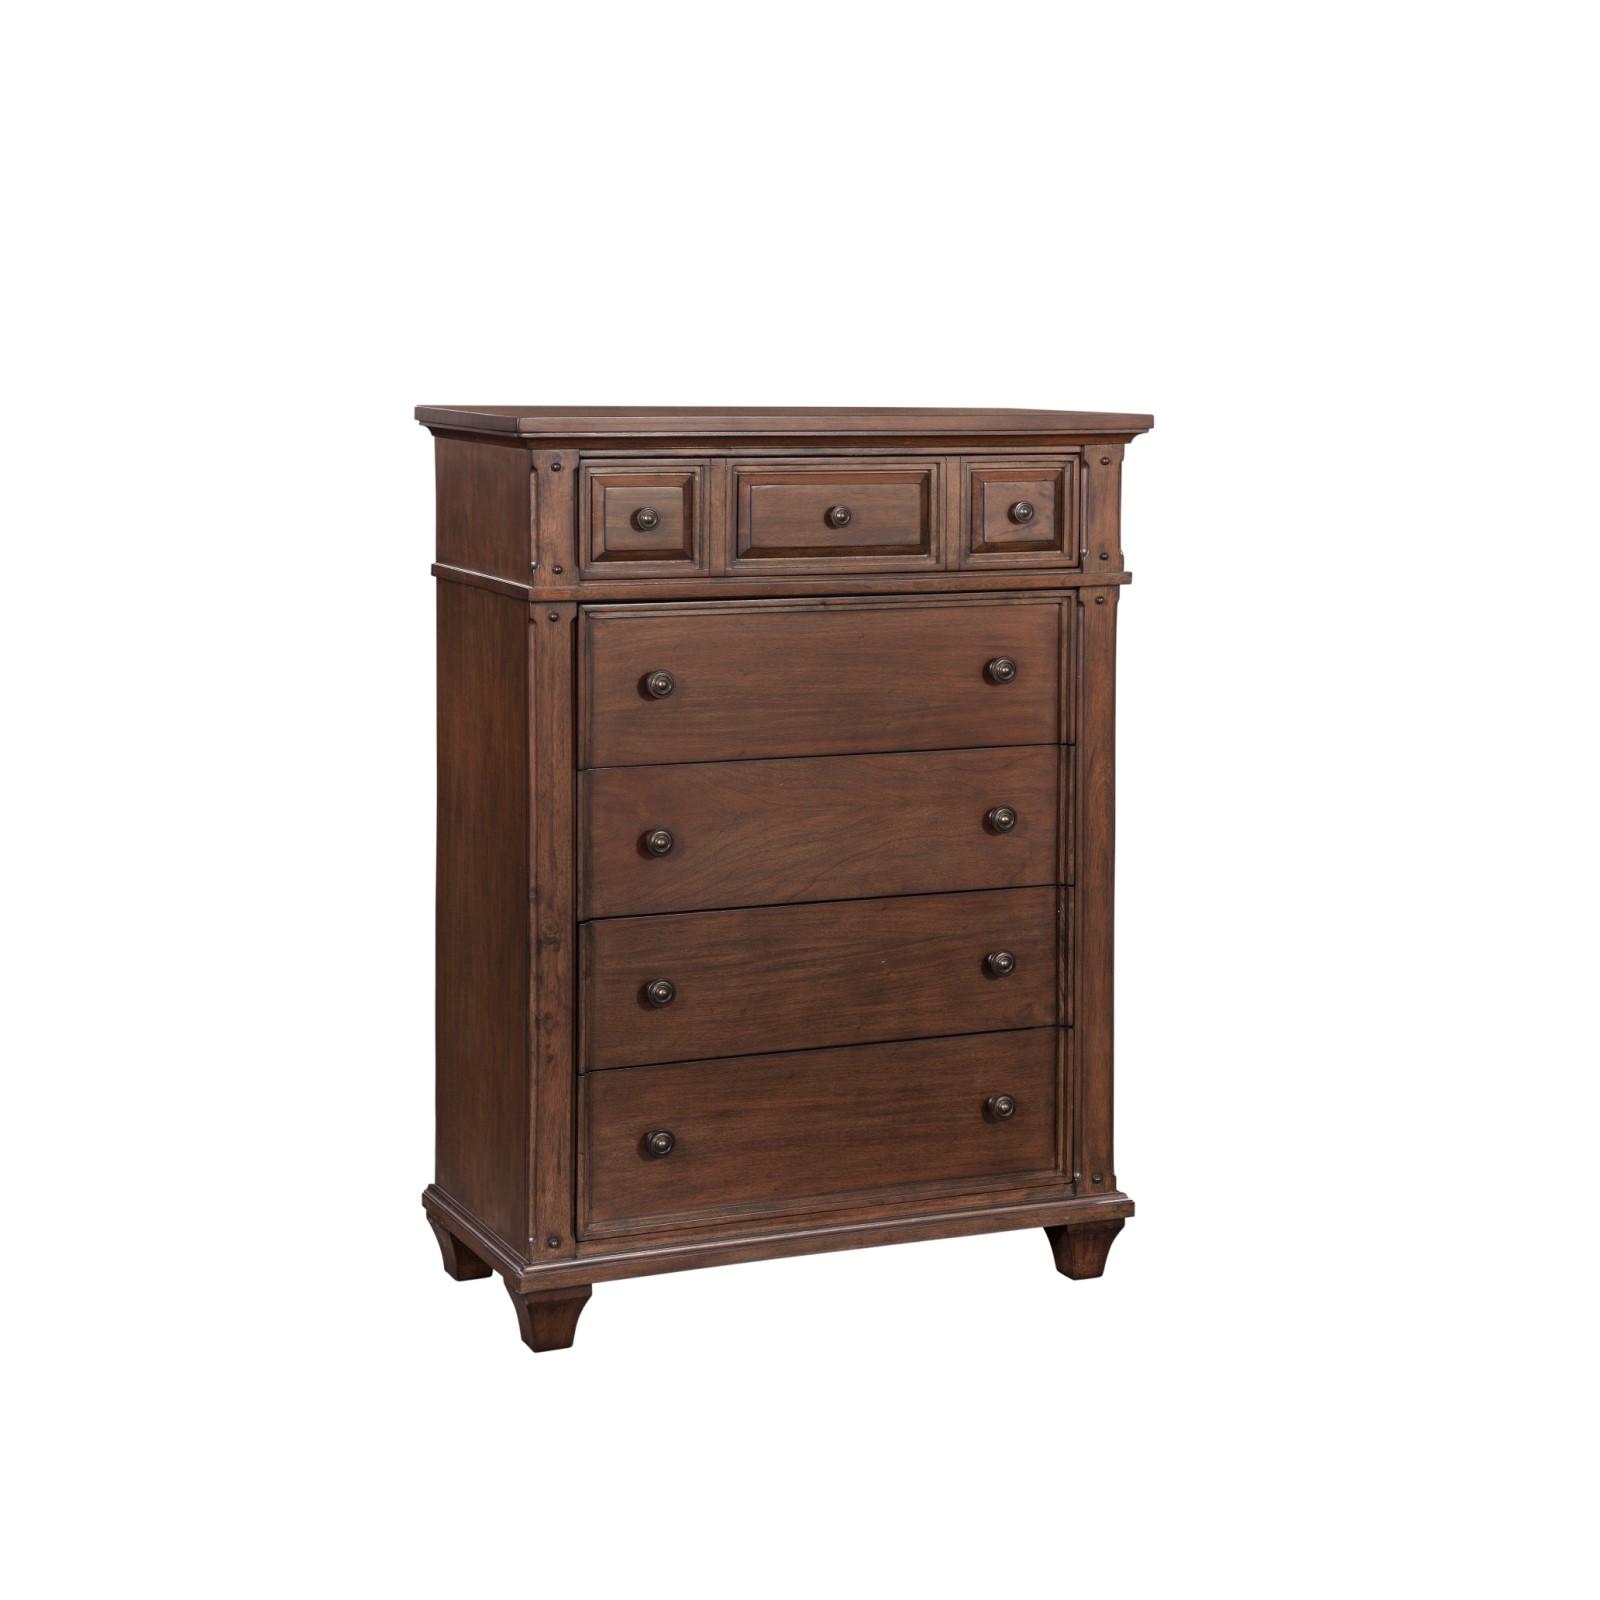 Classic, Traditional Chest SEDONA 2400-150 2400-150 in Cherry 